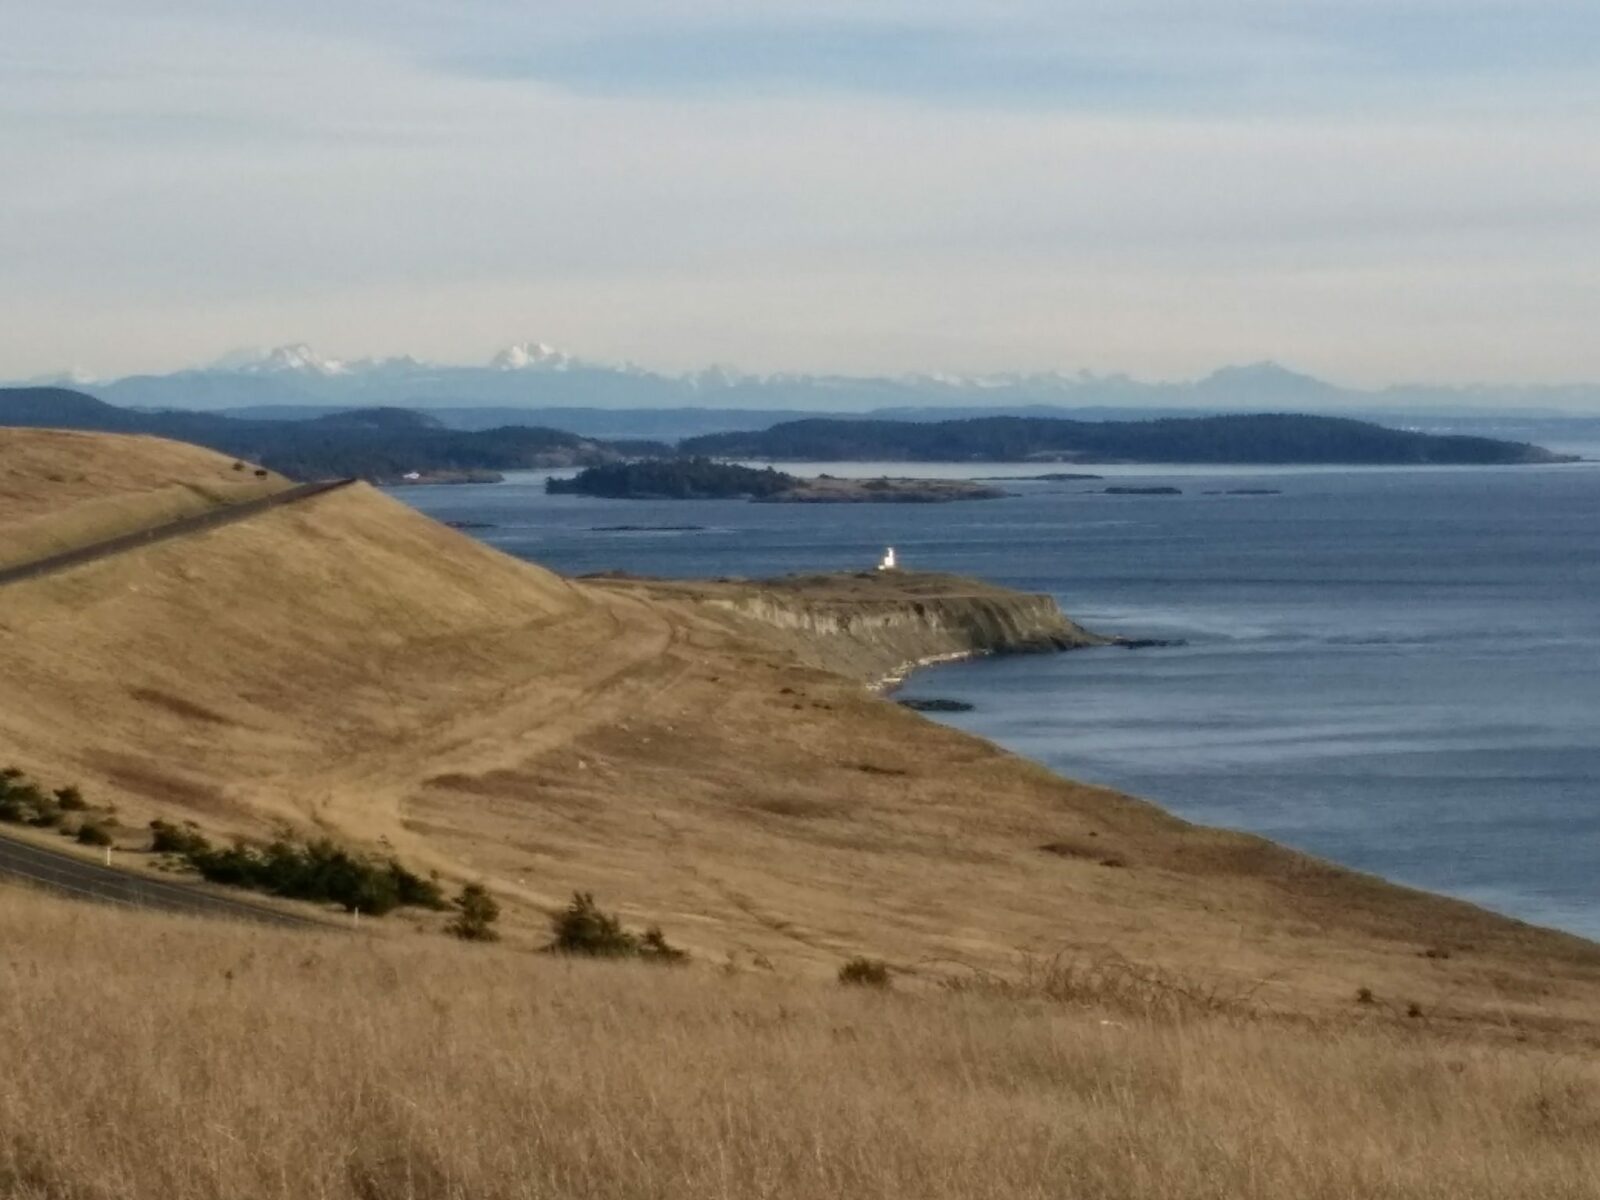 A field along a beach with a lighthouse and distant islands and mountains from the best hike on san juan island, mt finlayson